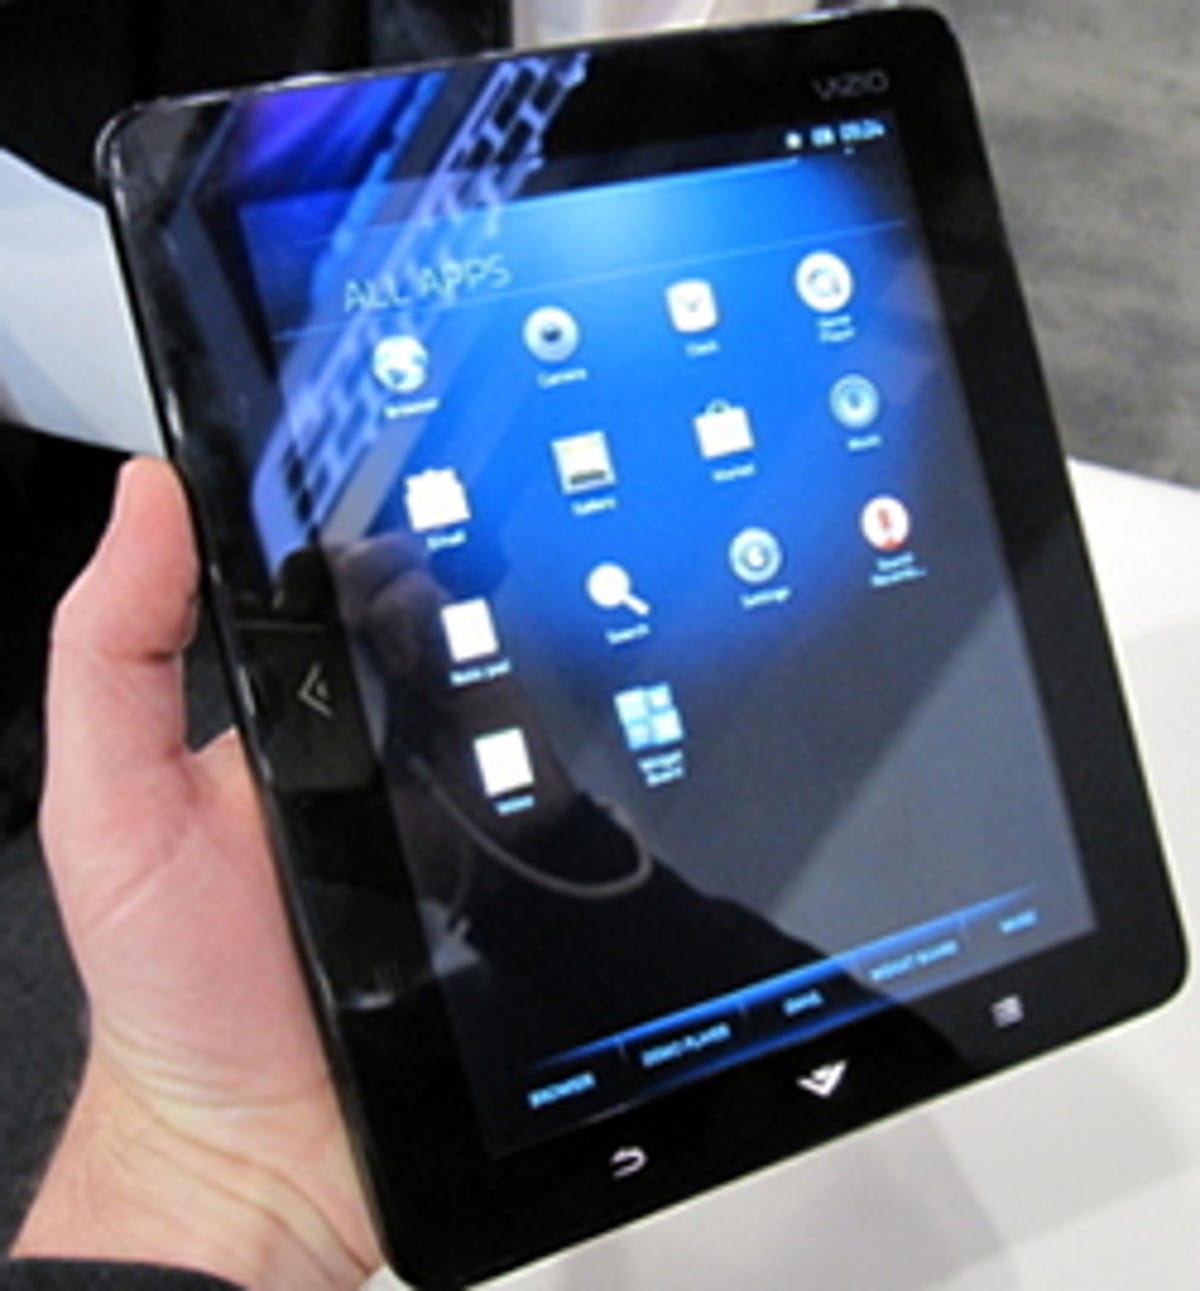 Is Vizio's new 8-inch tablet about to debut?